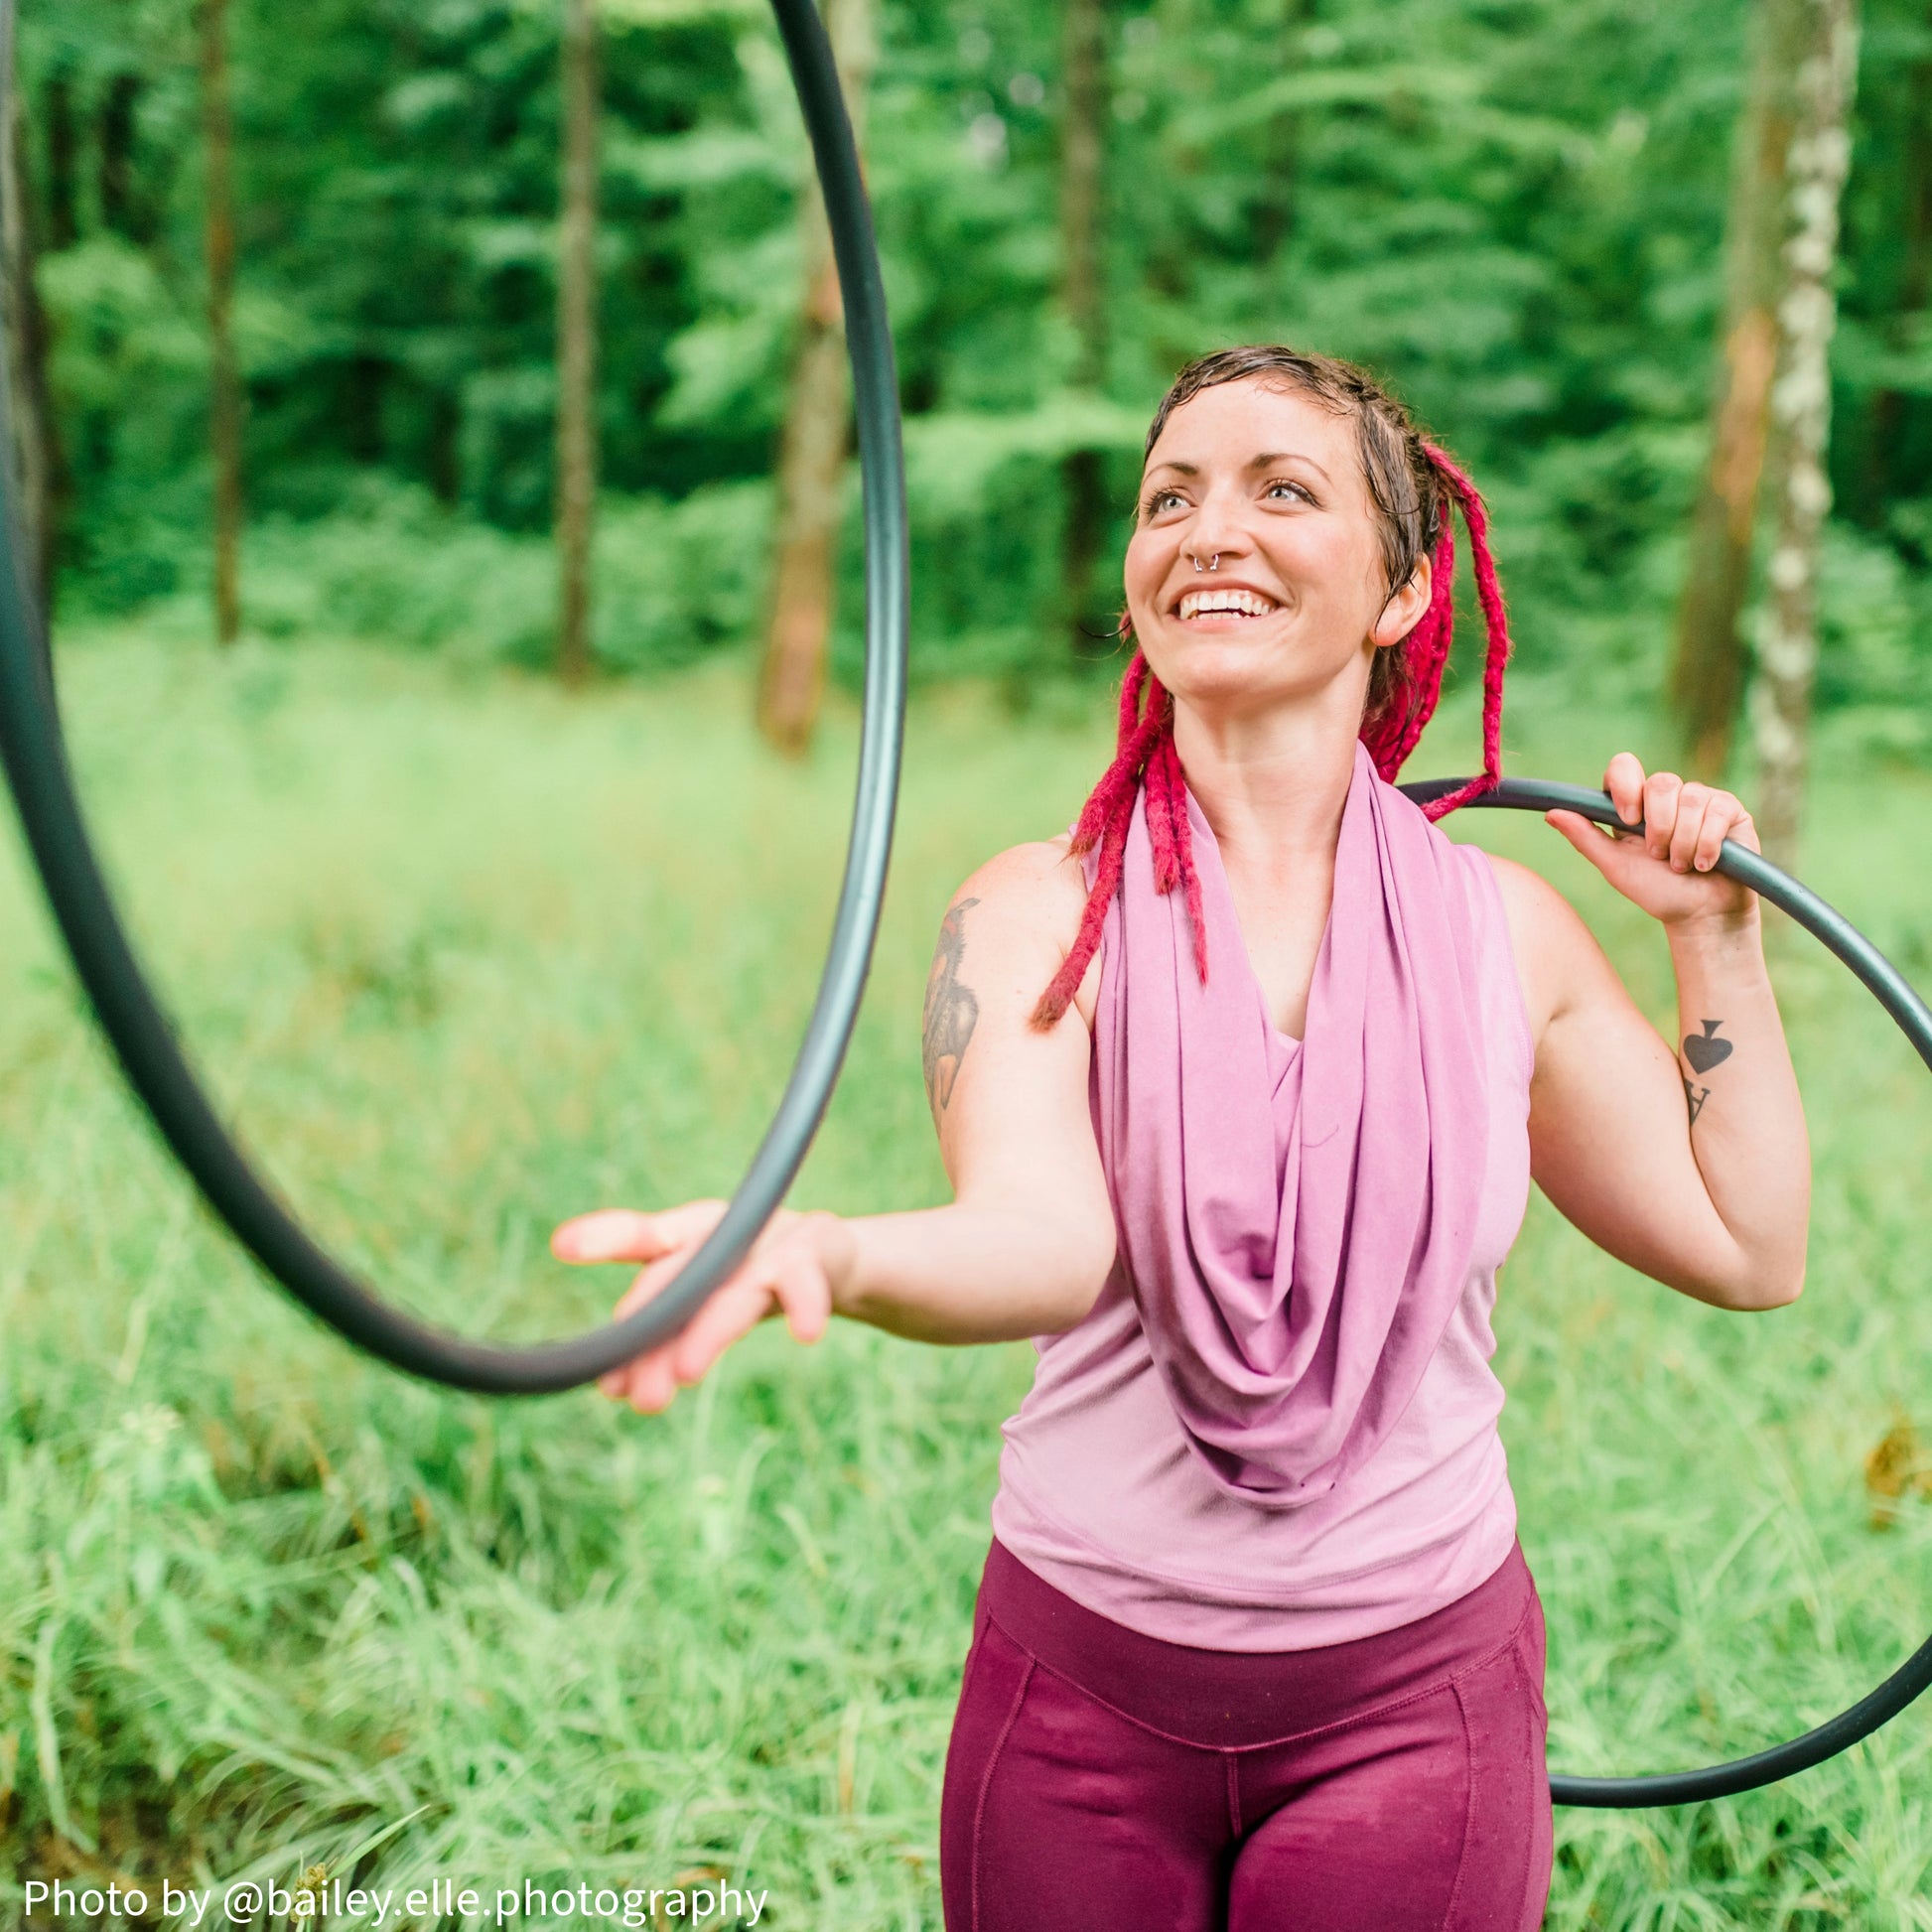 How To Find the Best Hula Hoop Size – The Spinsterz